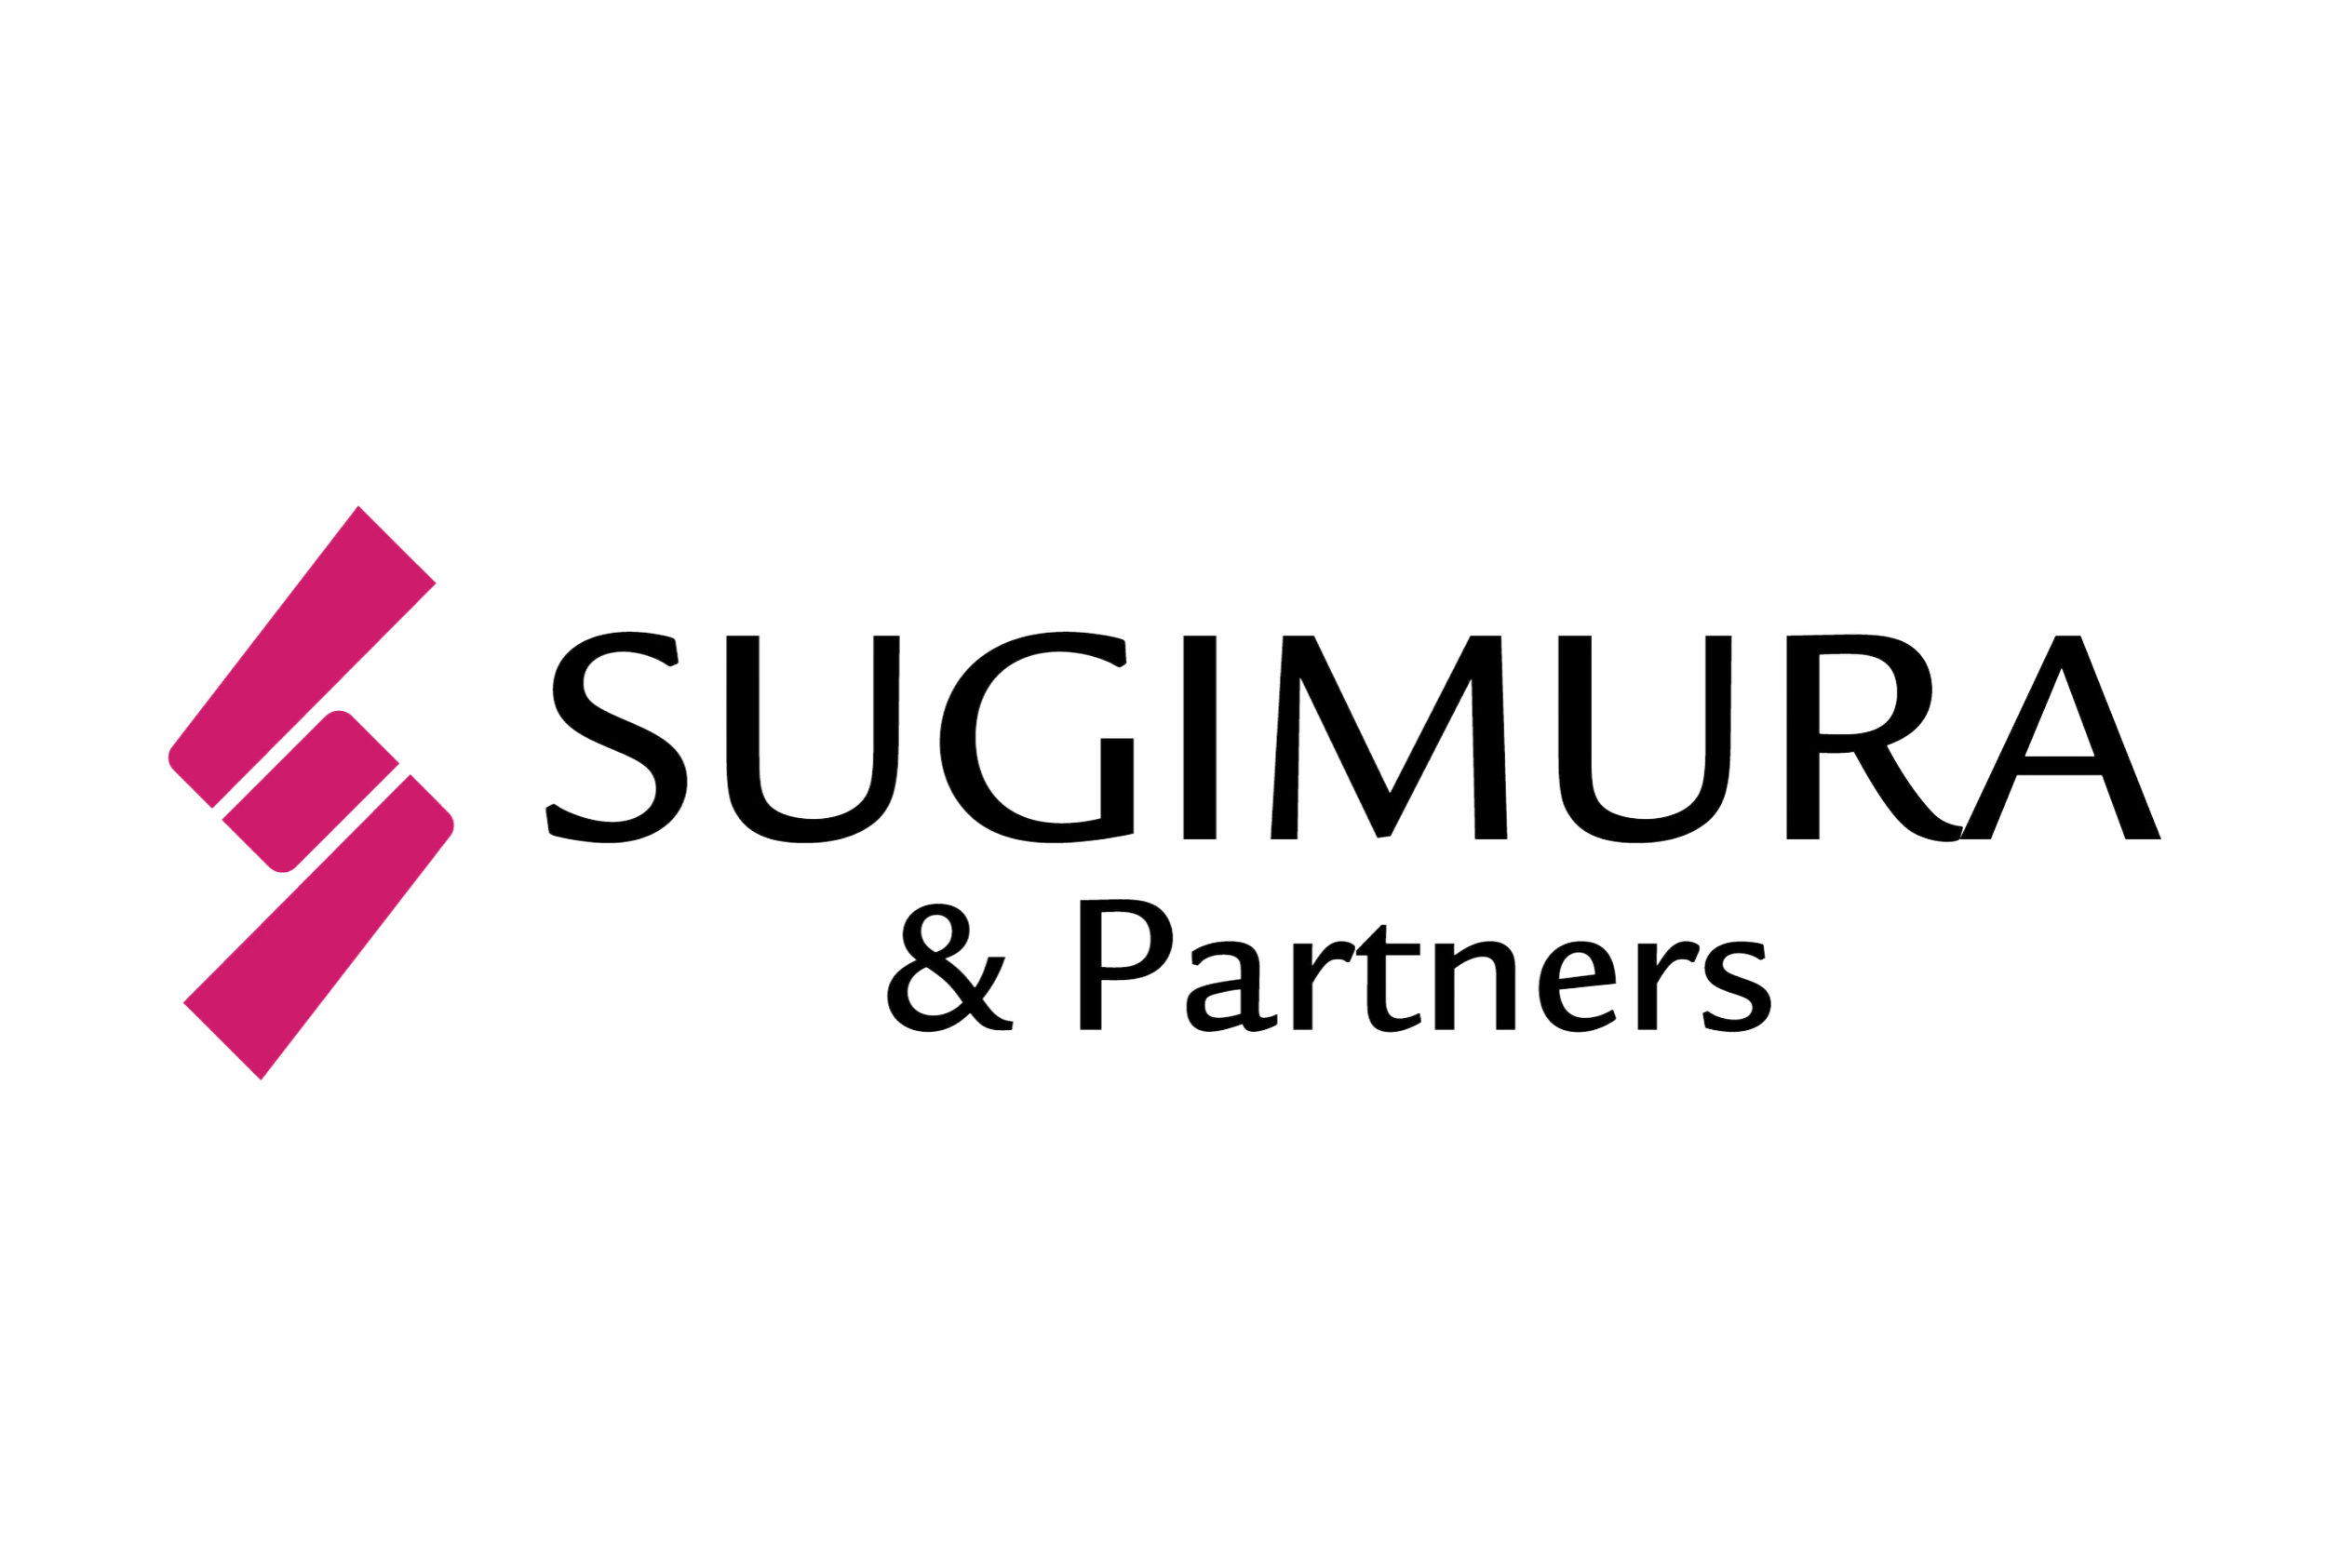 SUGIMURA & Partners (2608 x 1758 px).png